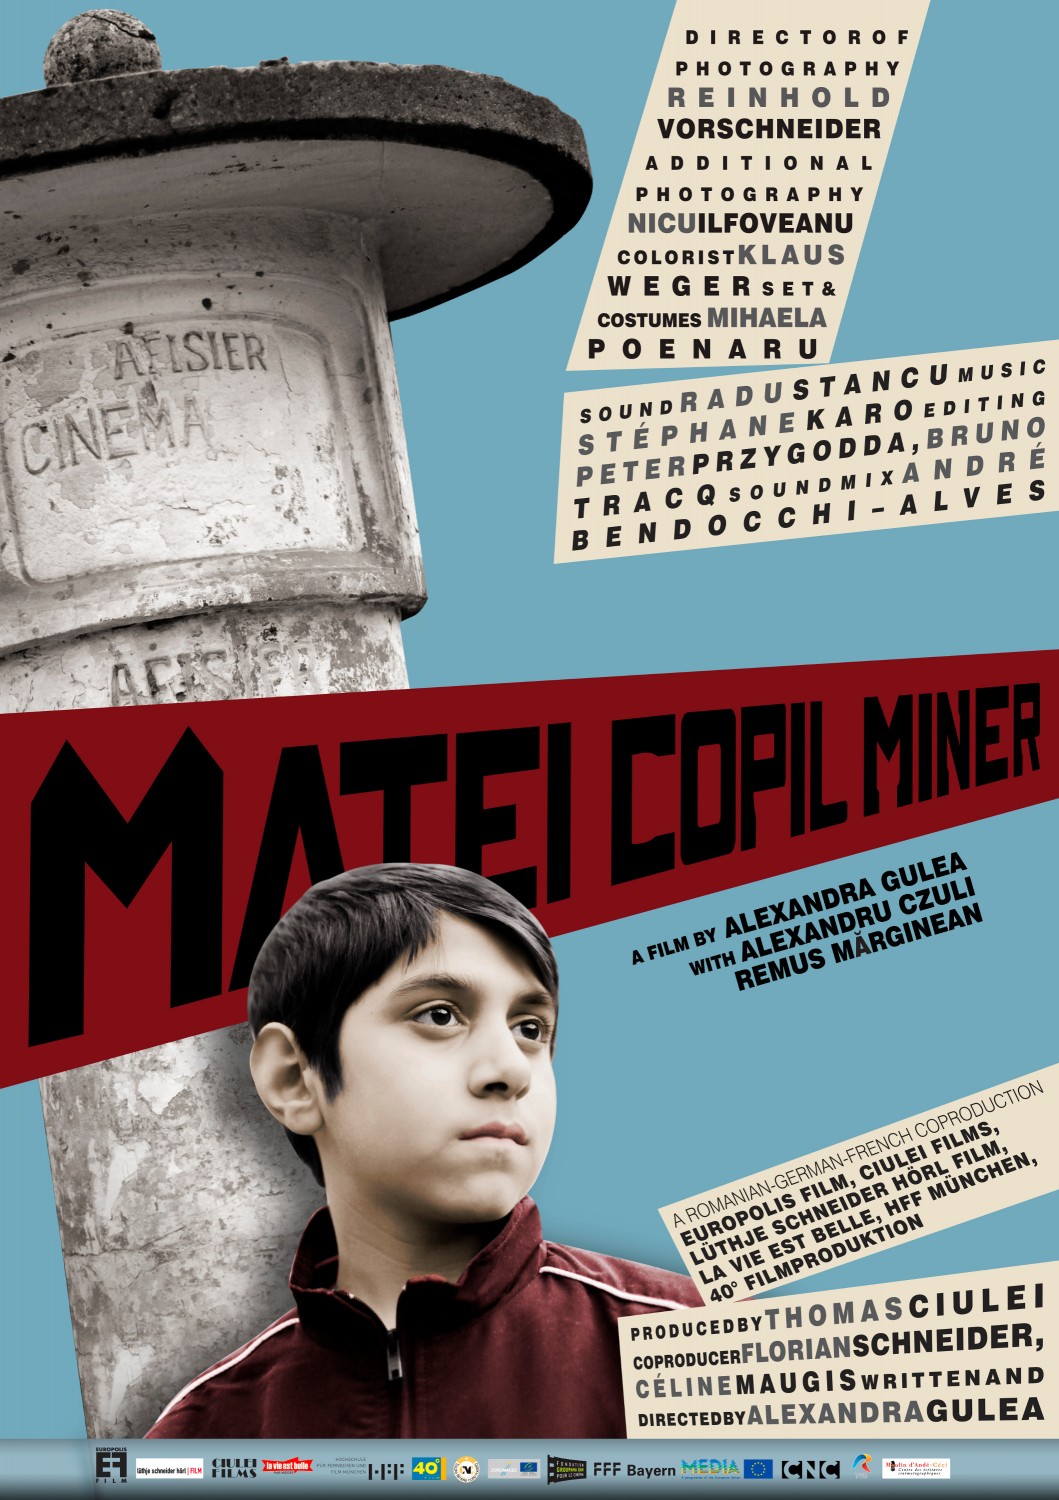 Extra Large Movie Poster Image for Matei Copil Miner 